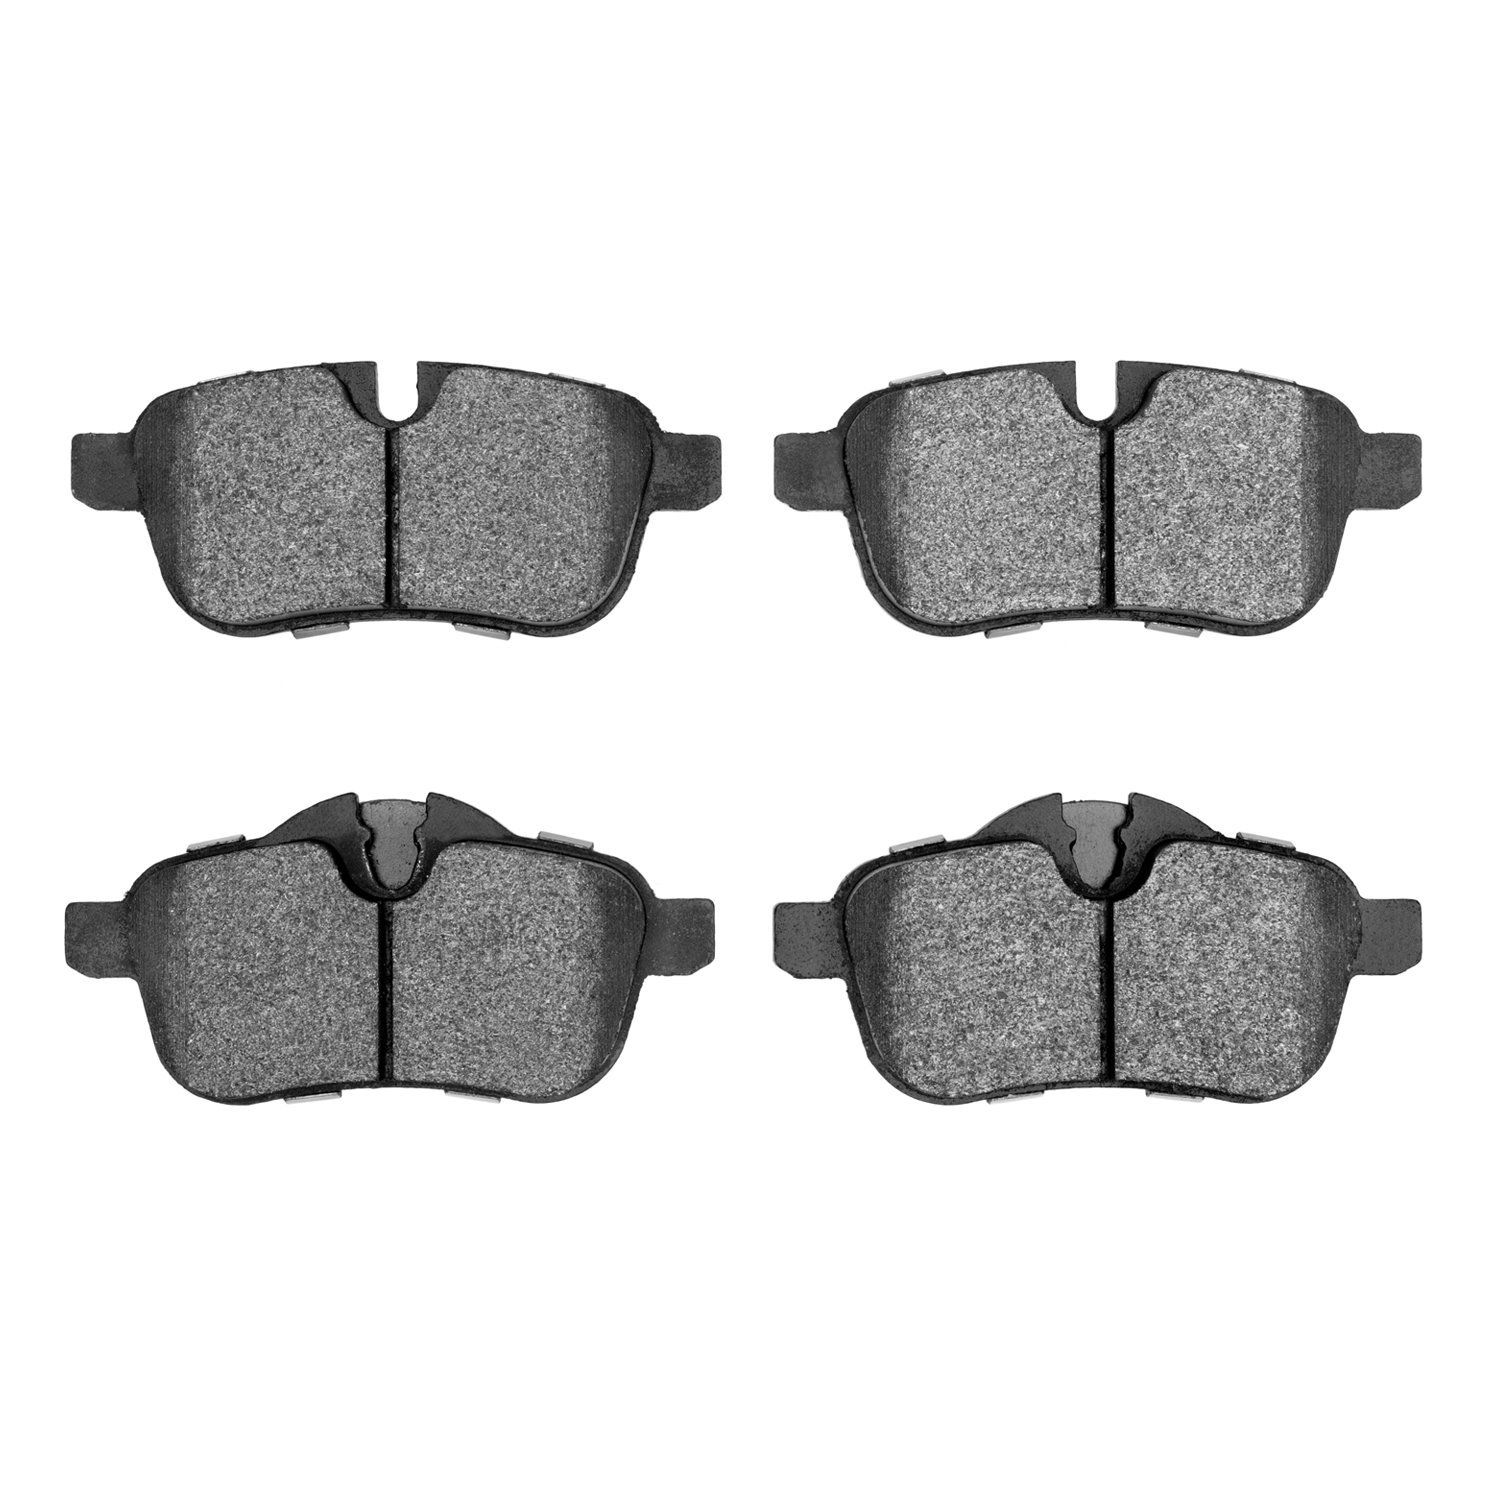 1115-1433-00 Active Performance Low-Metallic Brake Pads, Fits Select BMW, Position: Rear